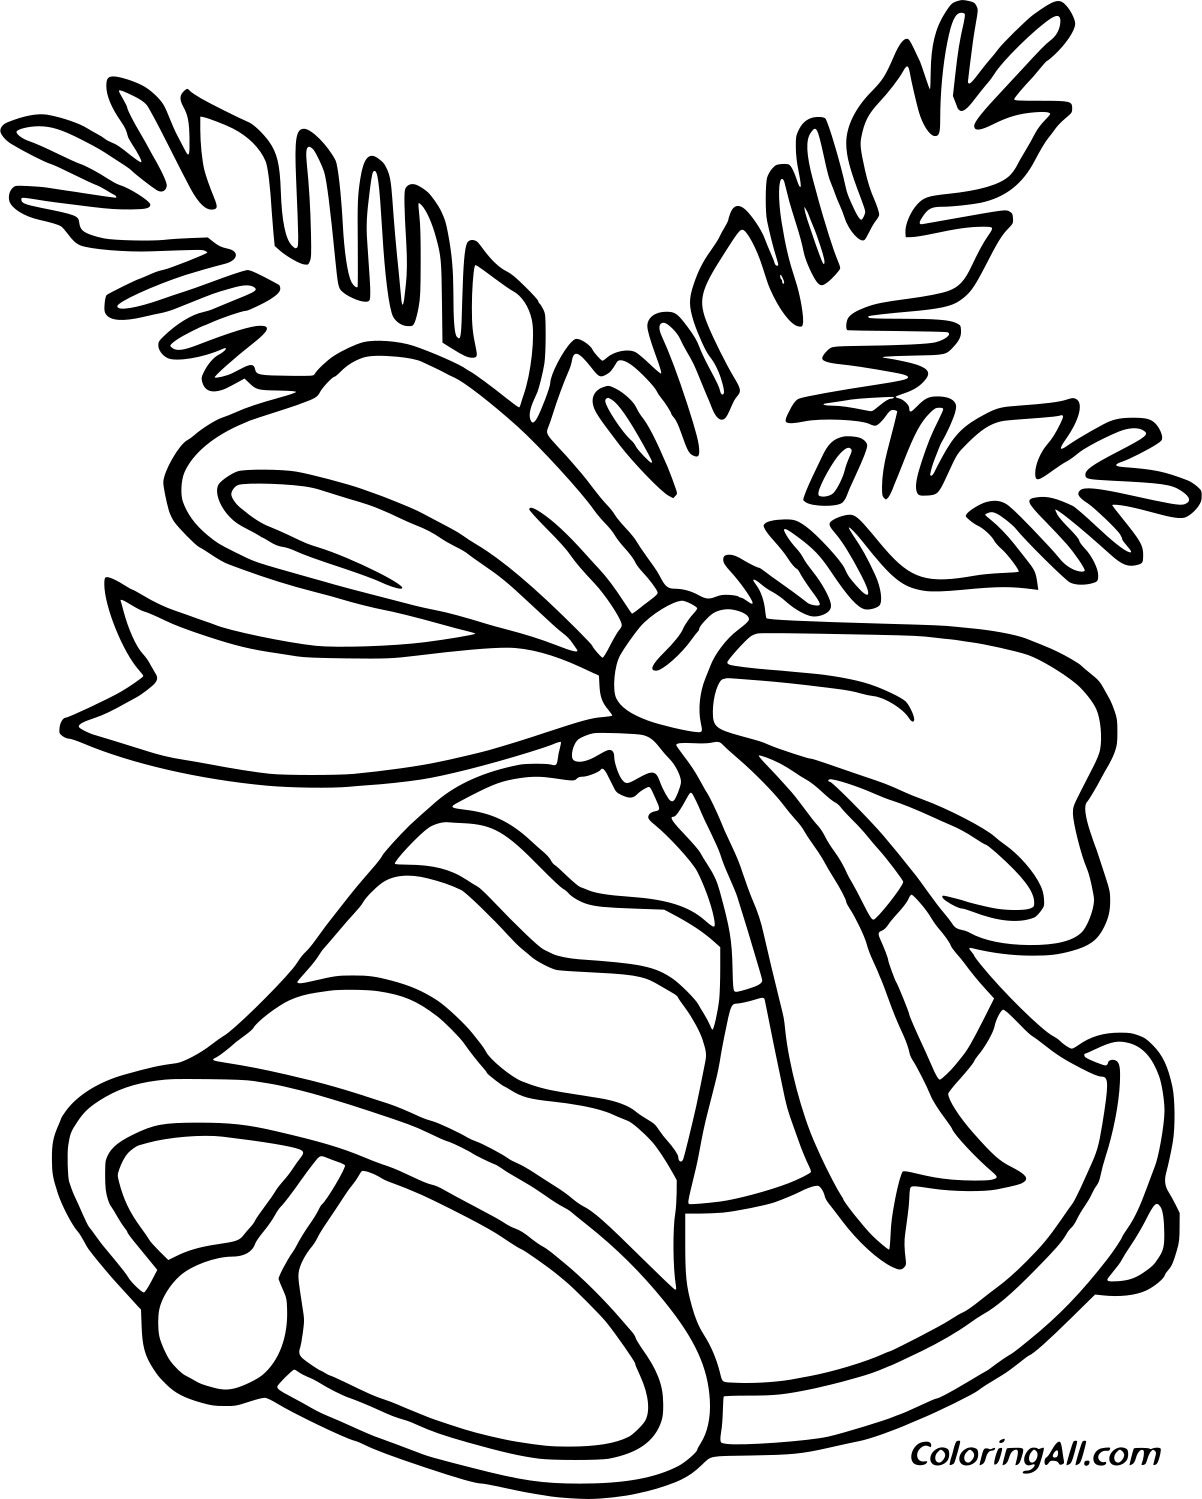 Christmas Bells Image For Kids Coloring Page